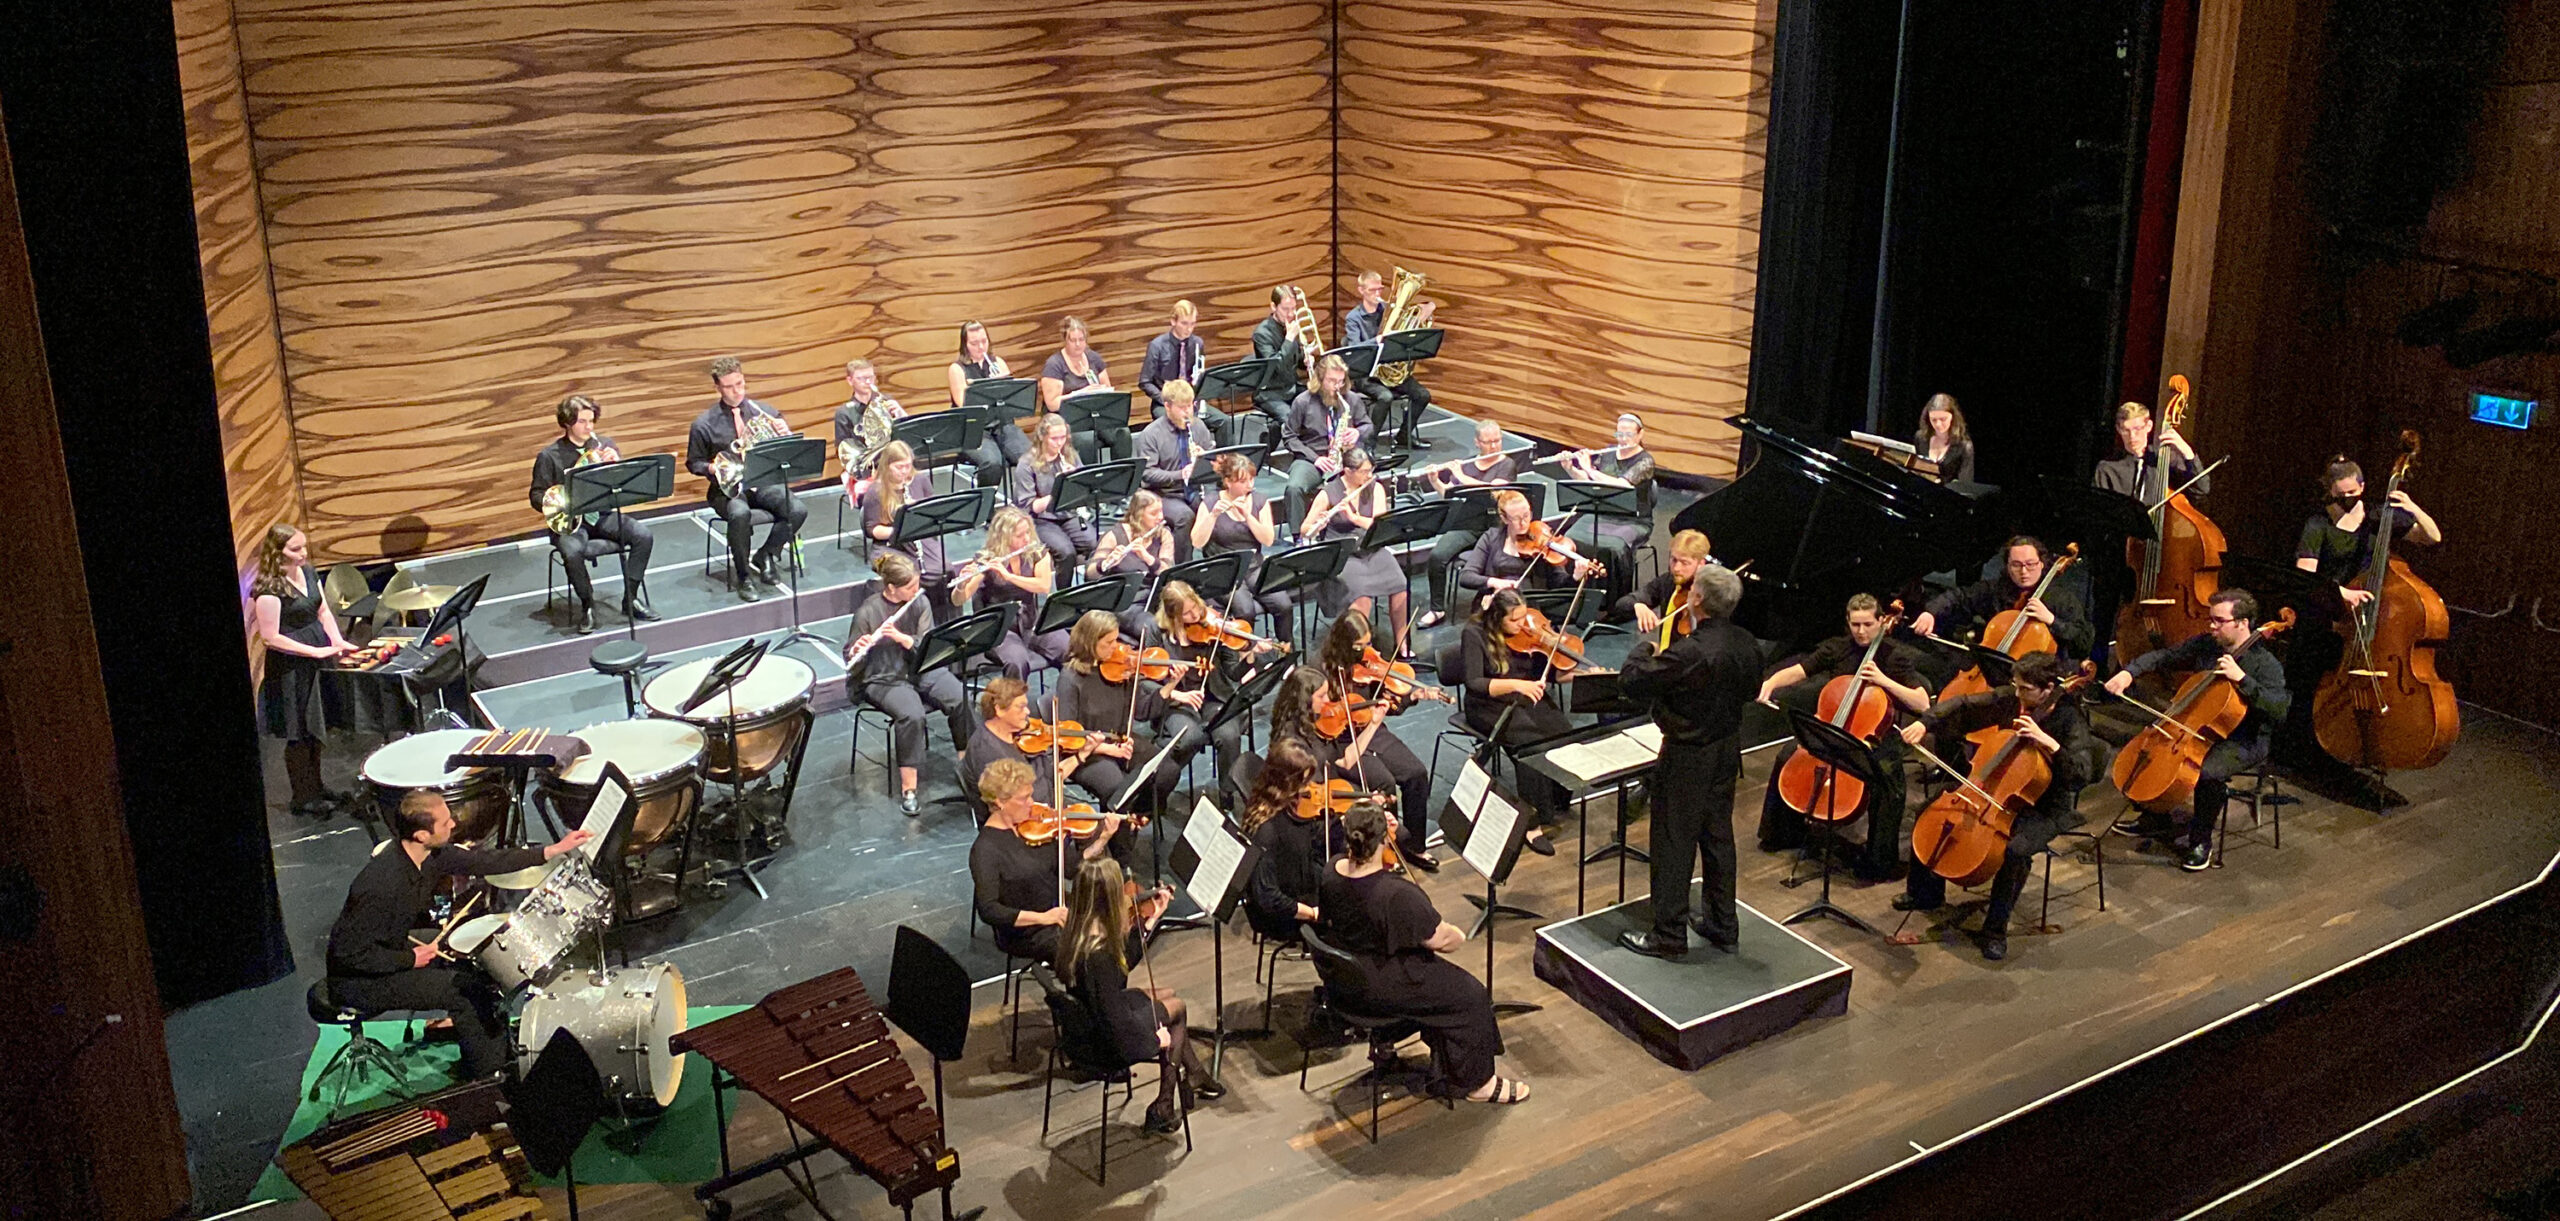 The Lebanon Valley College orchestra performs in Europe